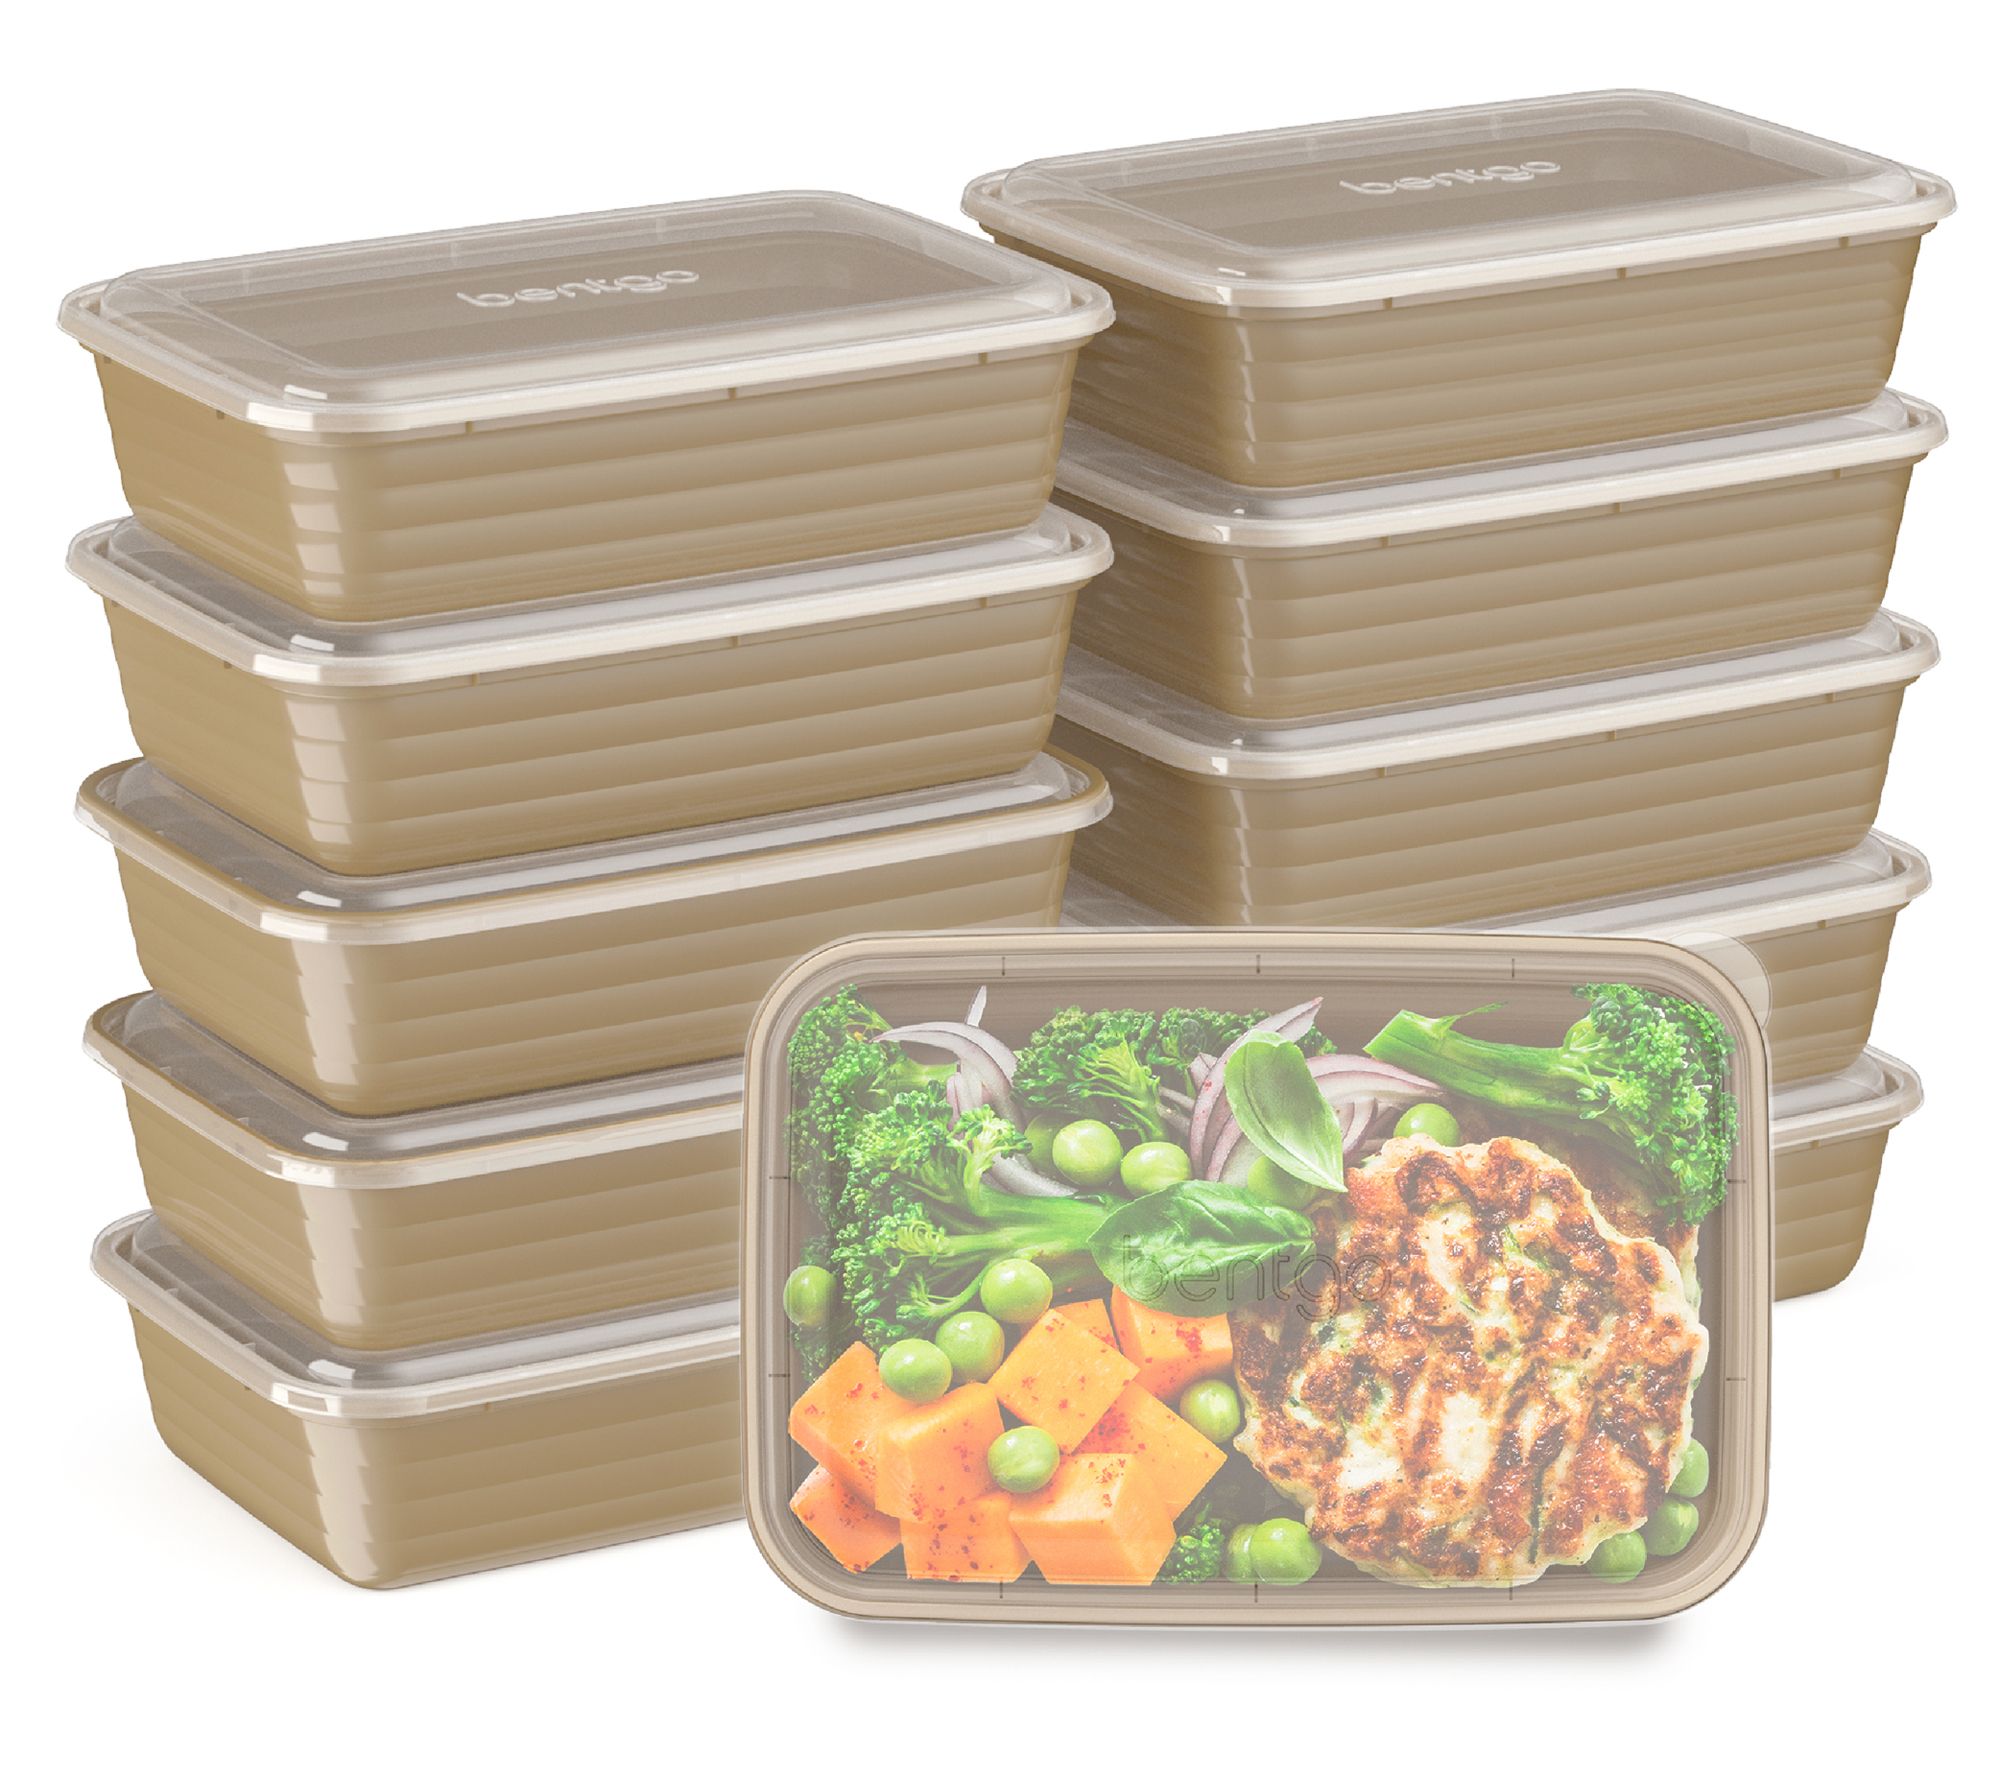 Meal Prep Containers (10) - Meal Prep To Go